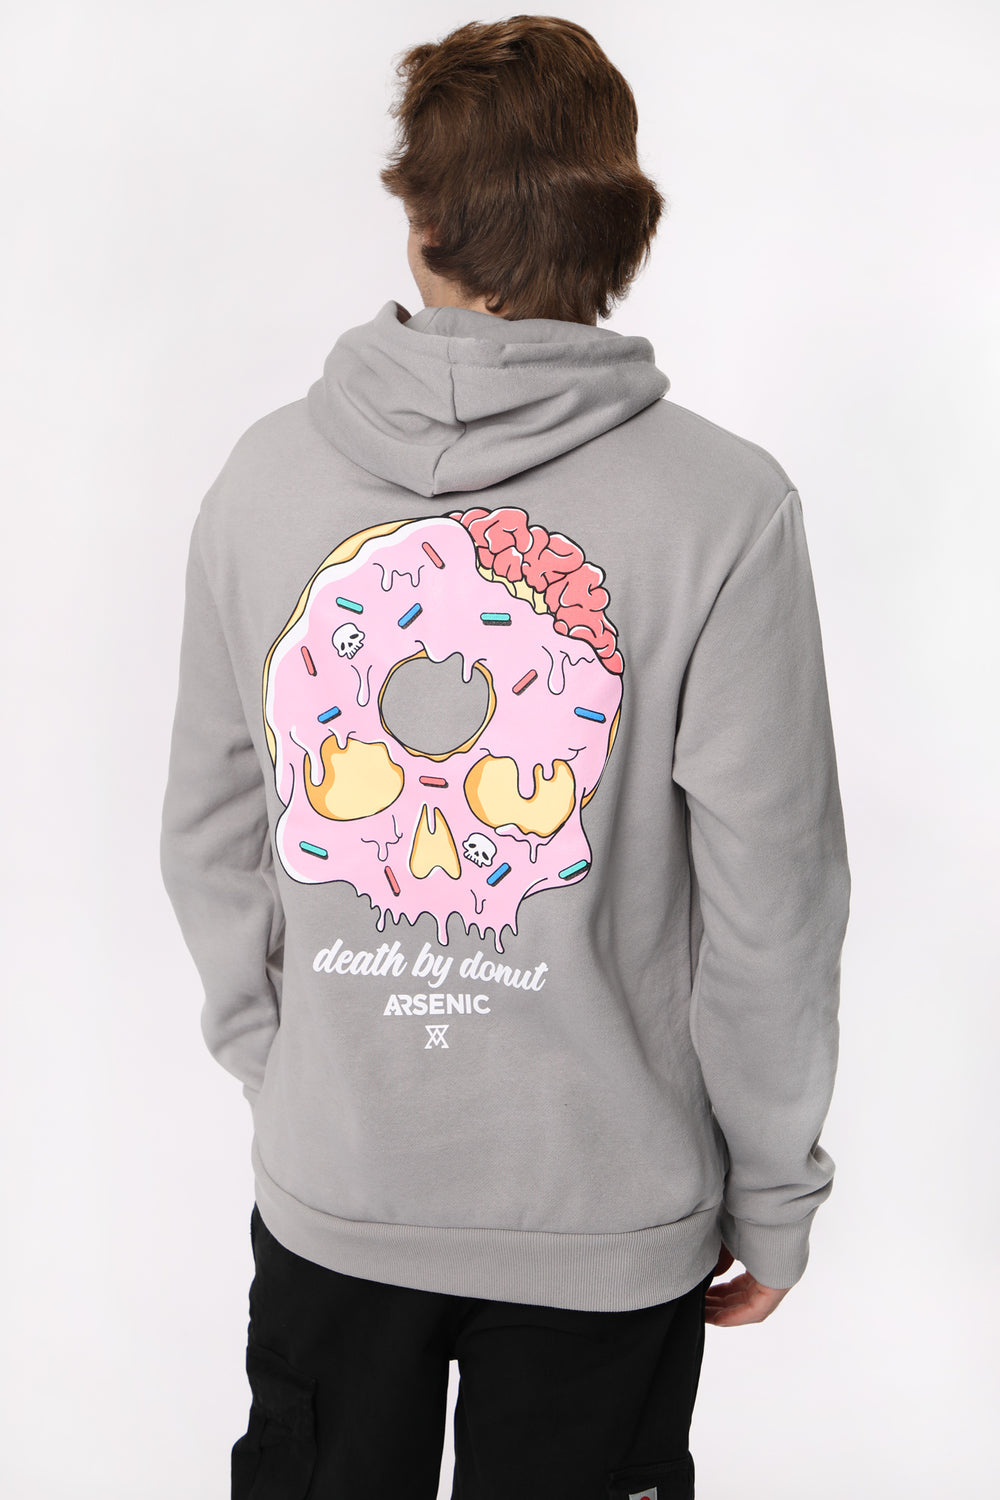 Arsenic Mens Death By Donut Hoodie Arsenic Mens Death By Donut Hoodie